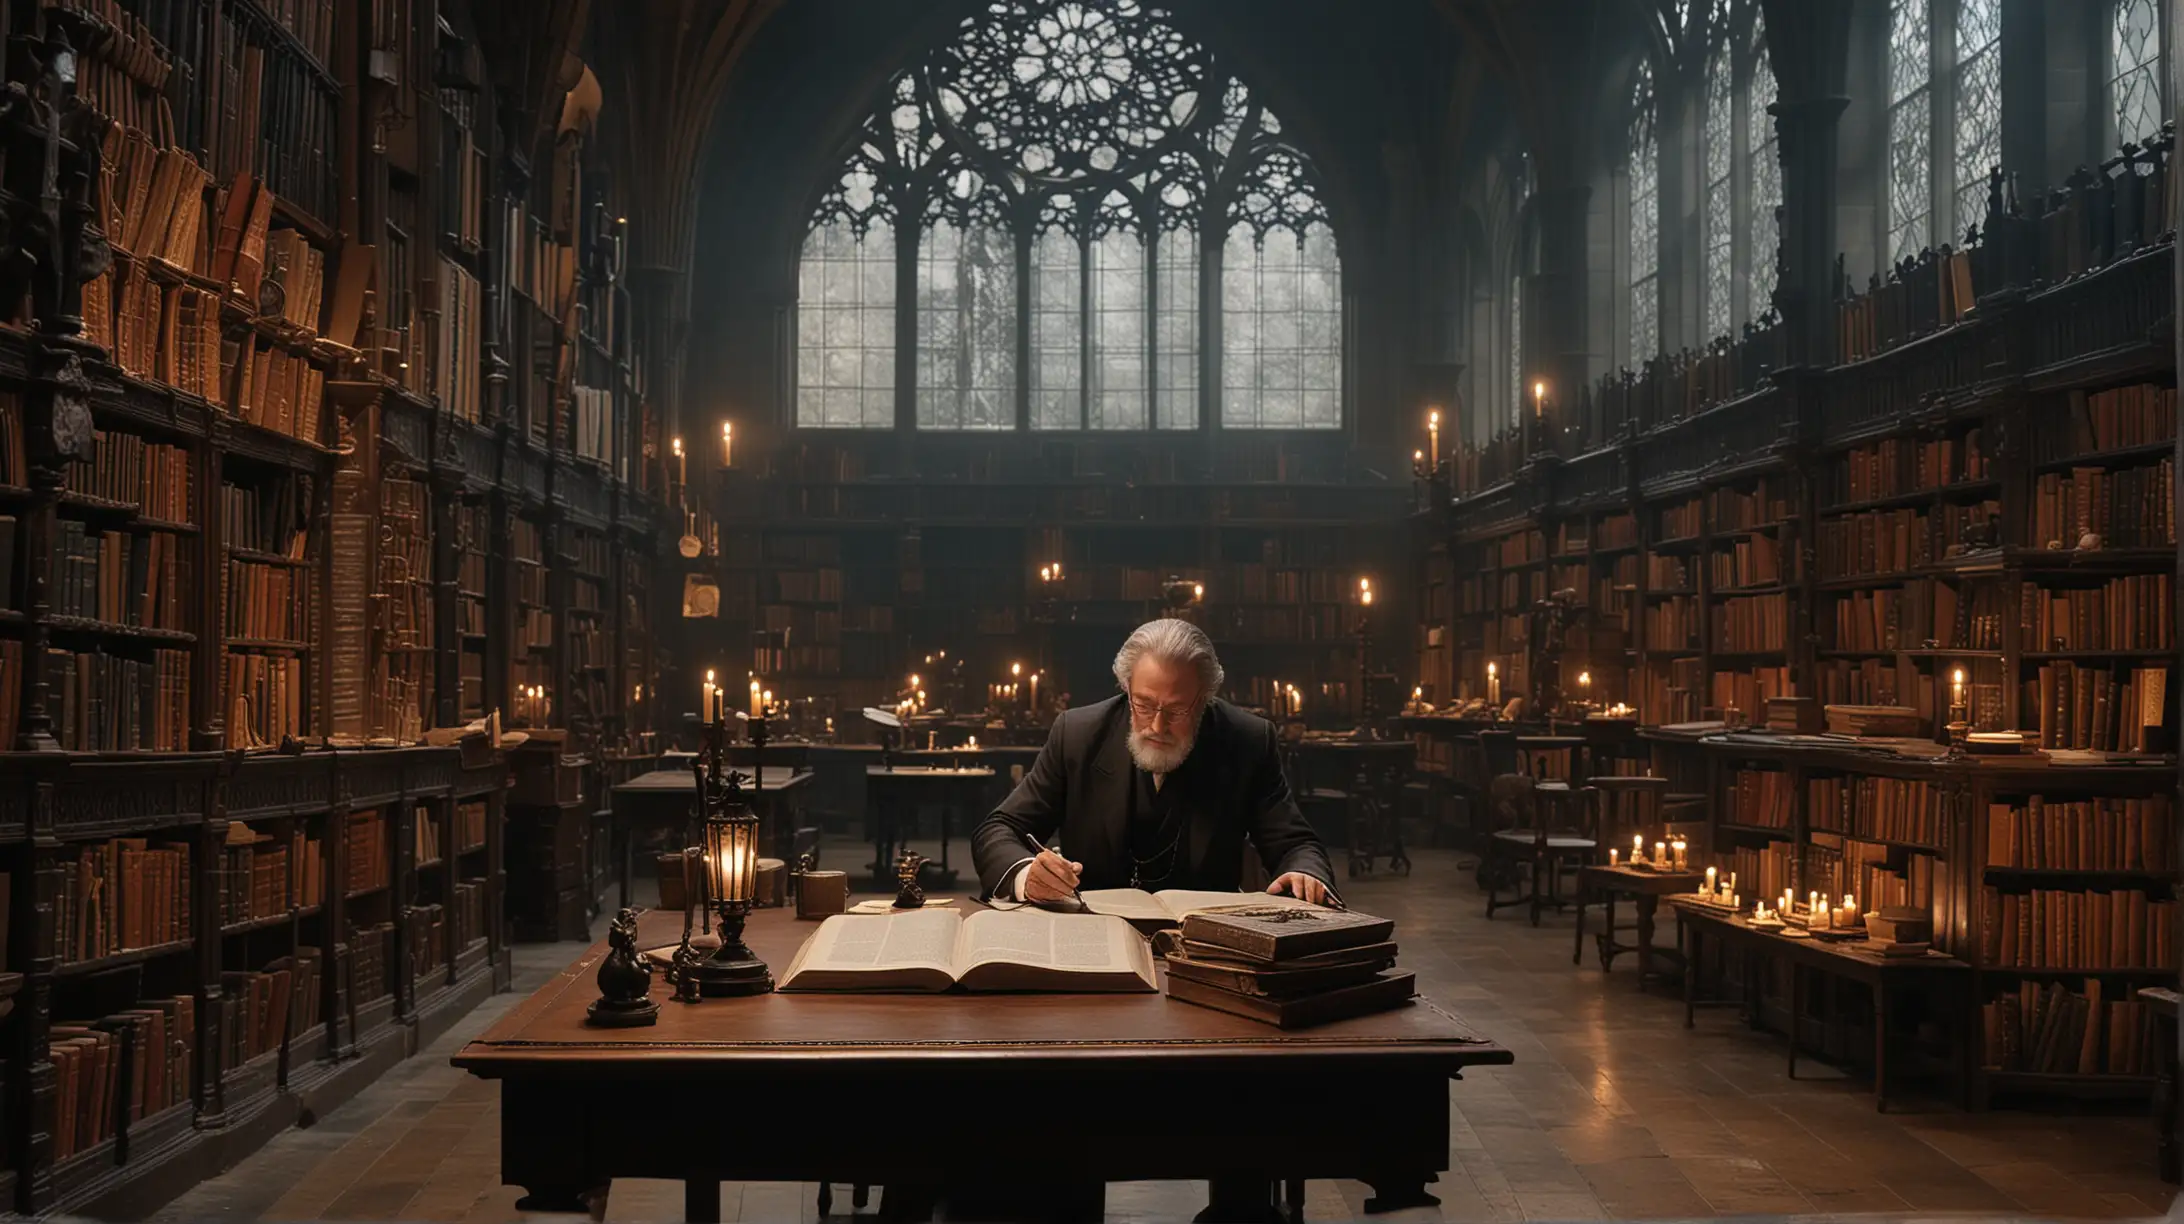 Charles Dexter Ward immersed in Gothic library reading